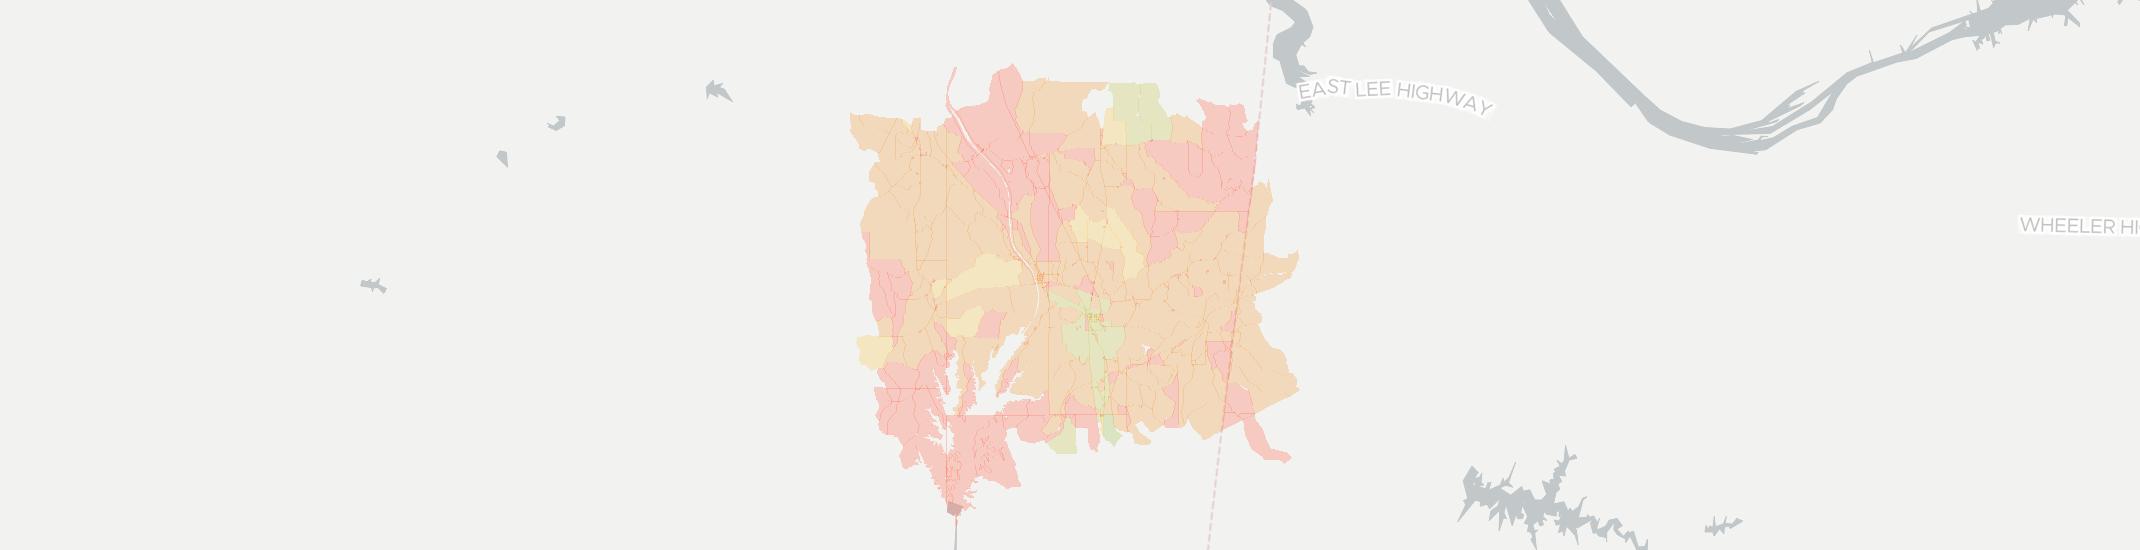 Tishomingo Internet Competition Map. Click for interactive map